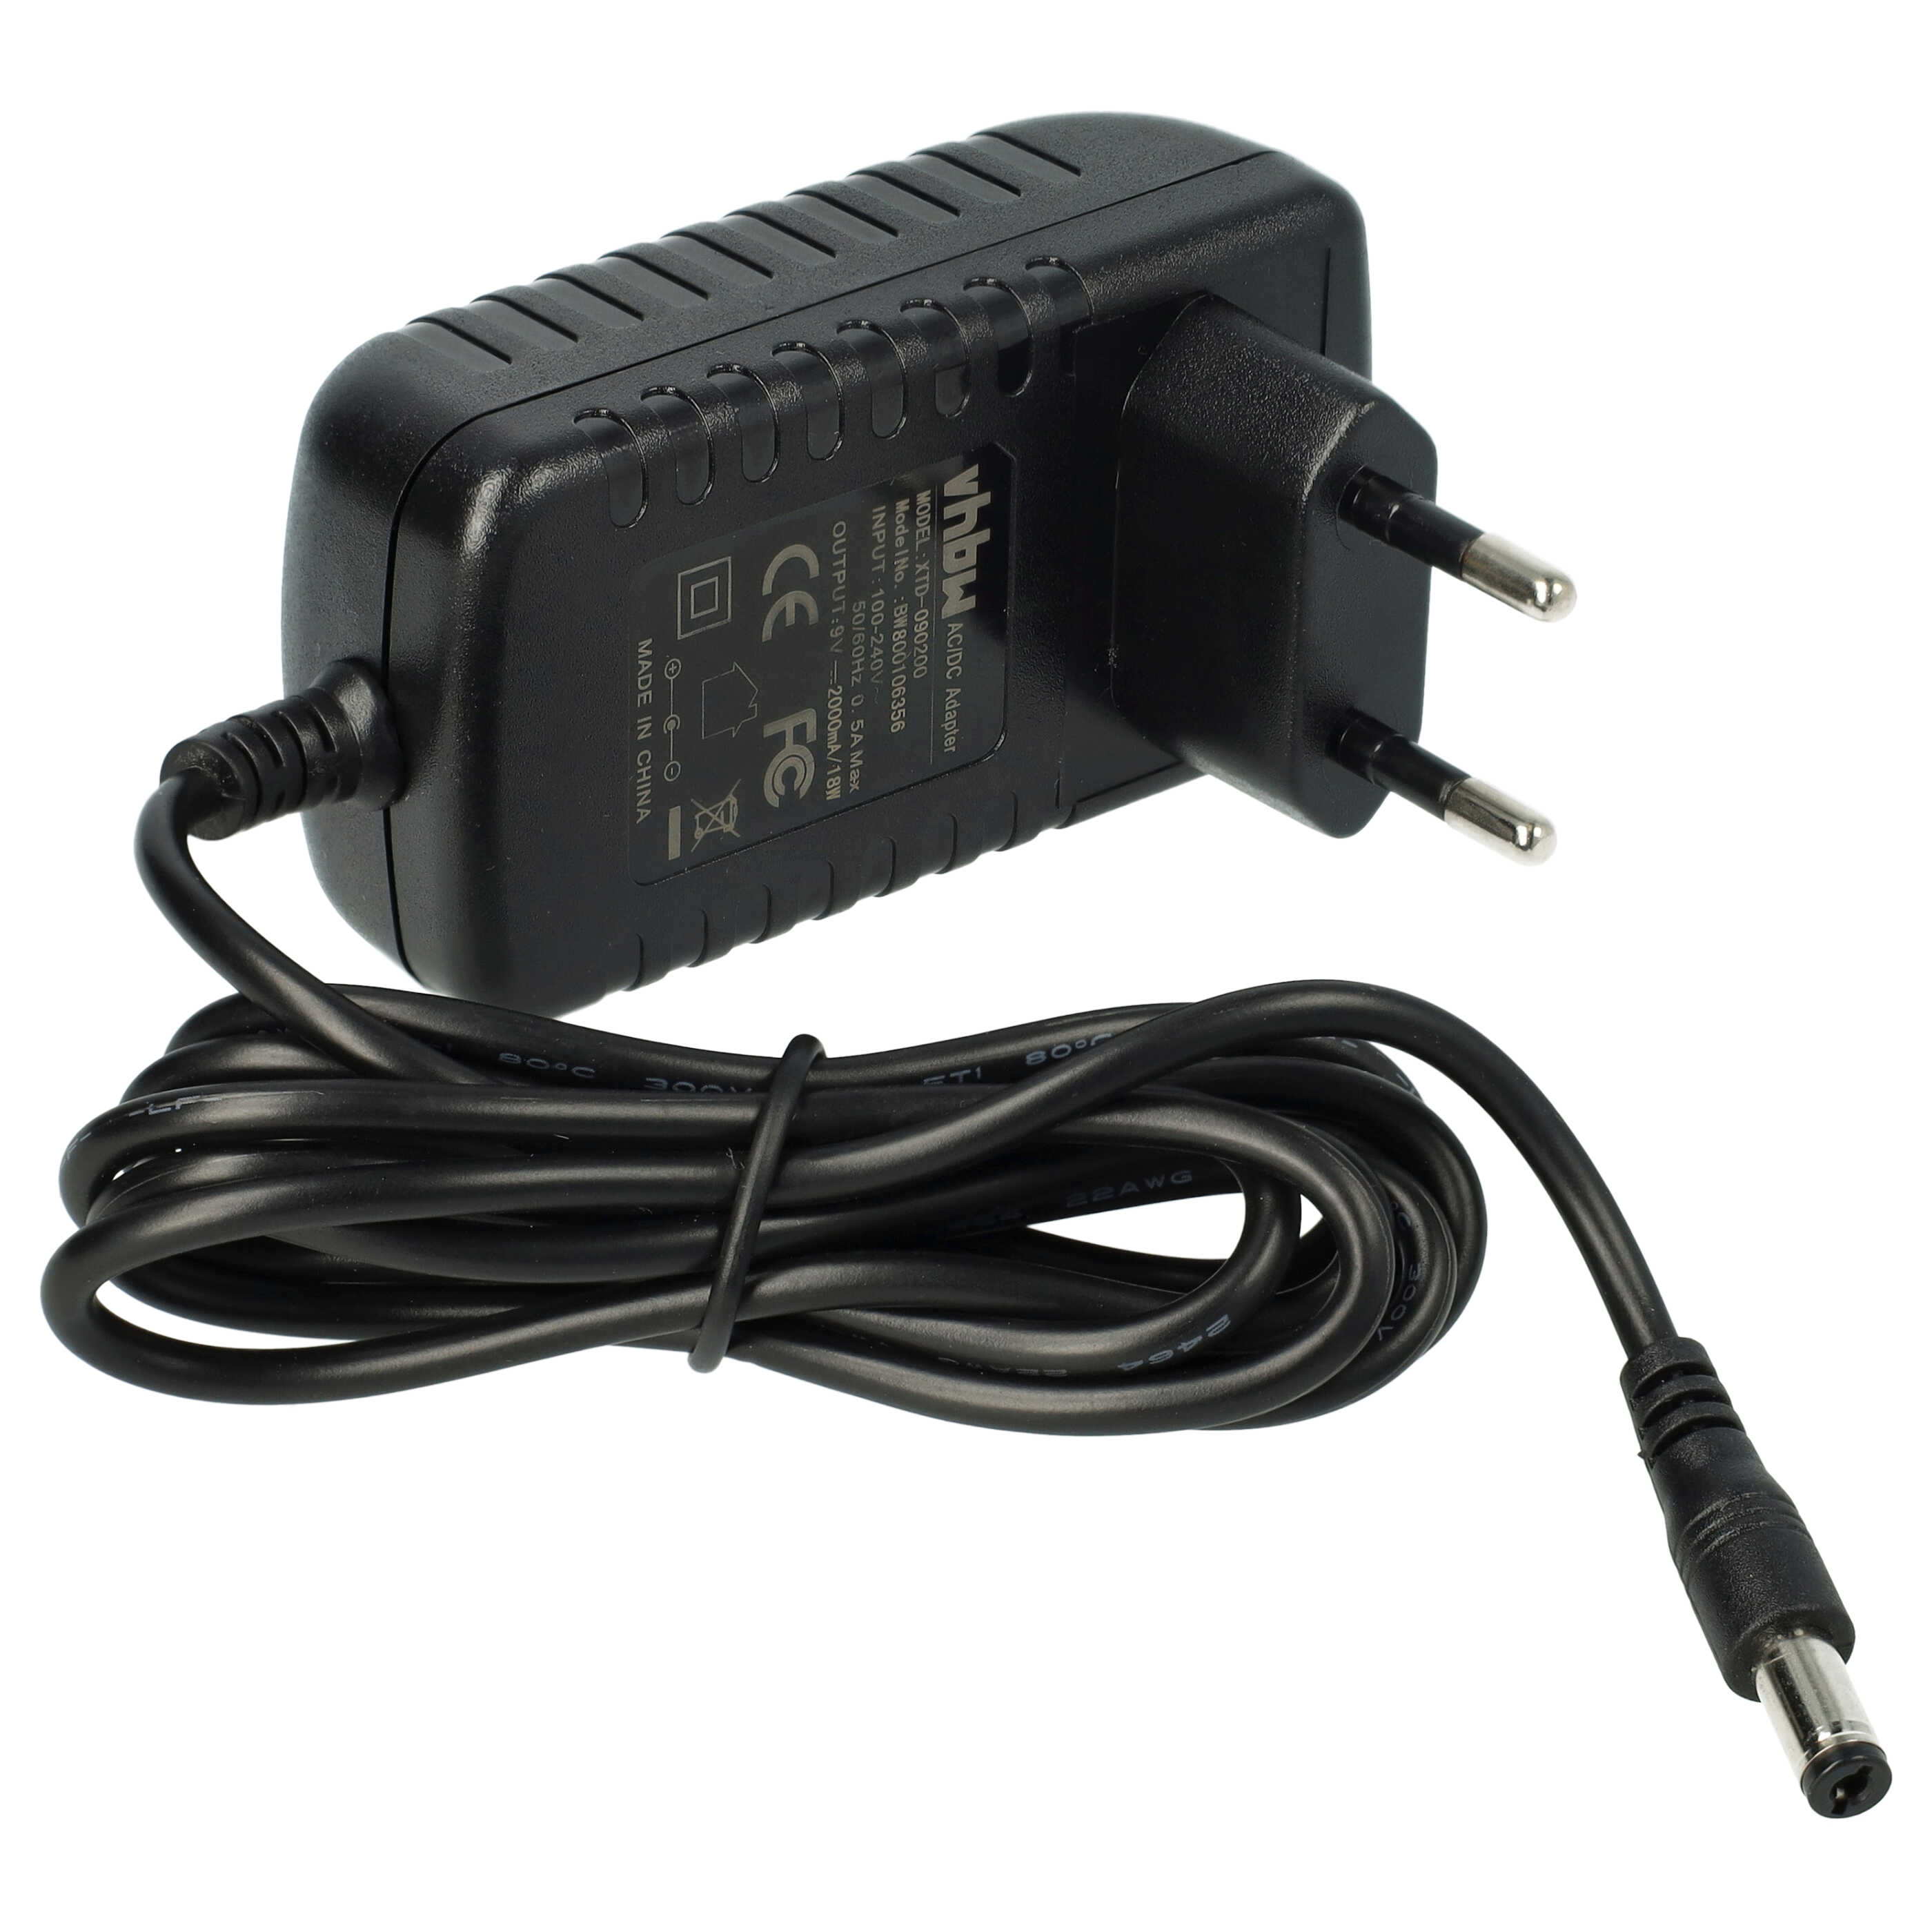 Mains Power Adapter replaces Brother AD-24, AD-30, AD-24EU, AD-24ES, AD-24E, AD-20 for Electric Devices -